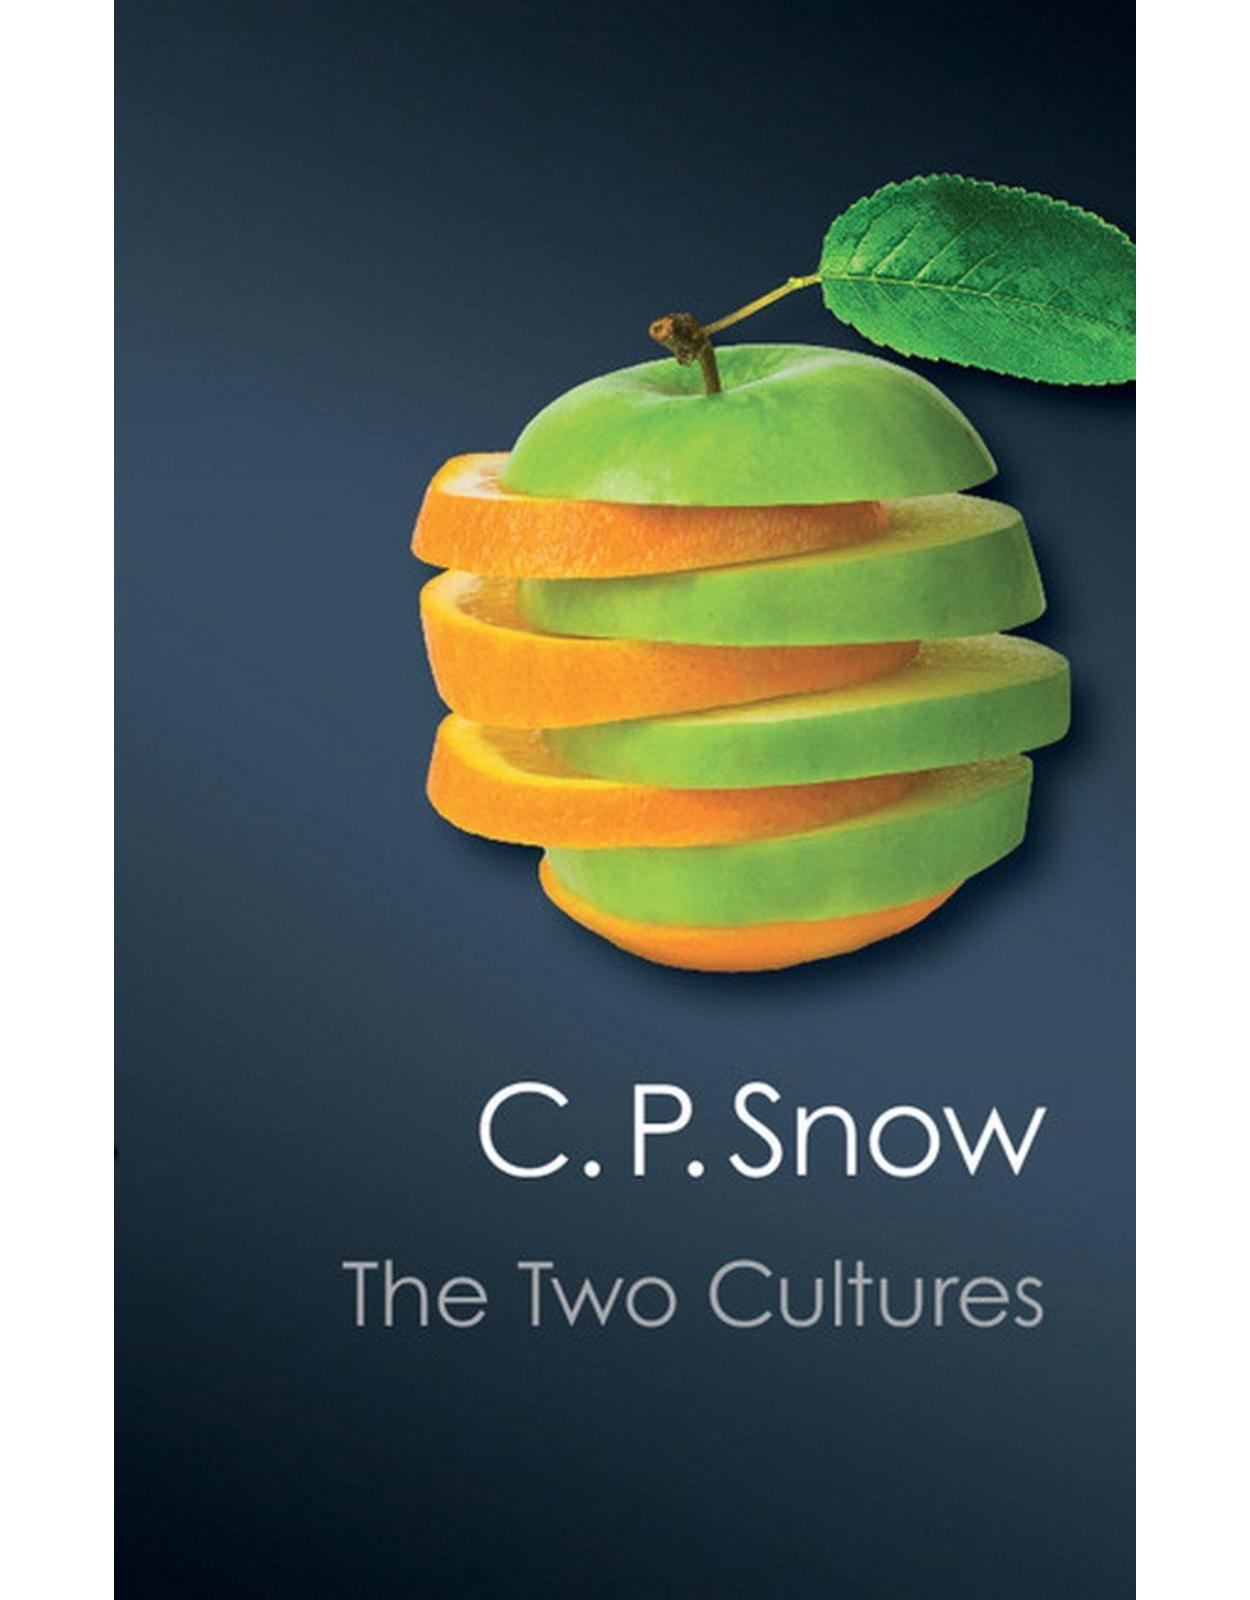 The Two Cultures (Canto Classics)